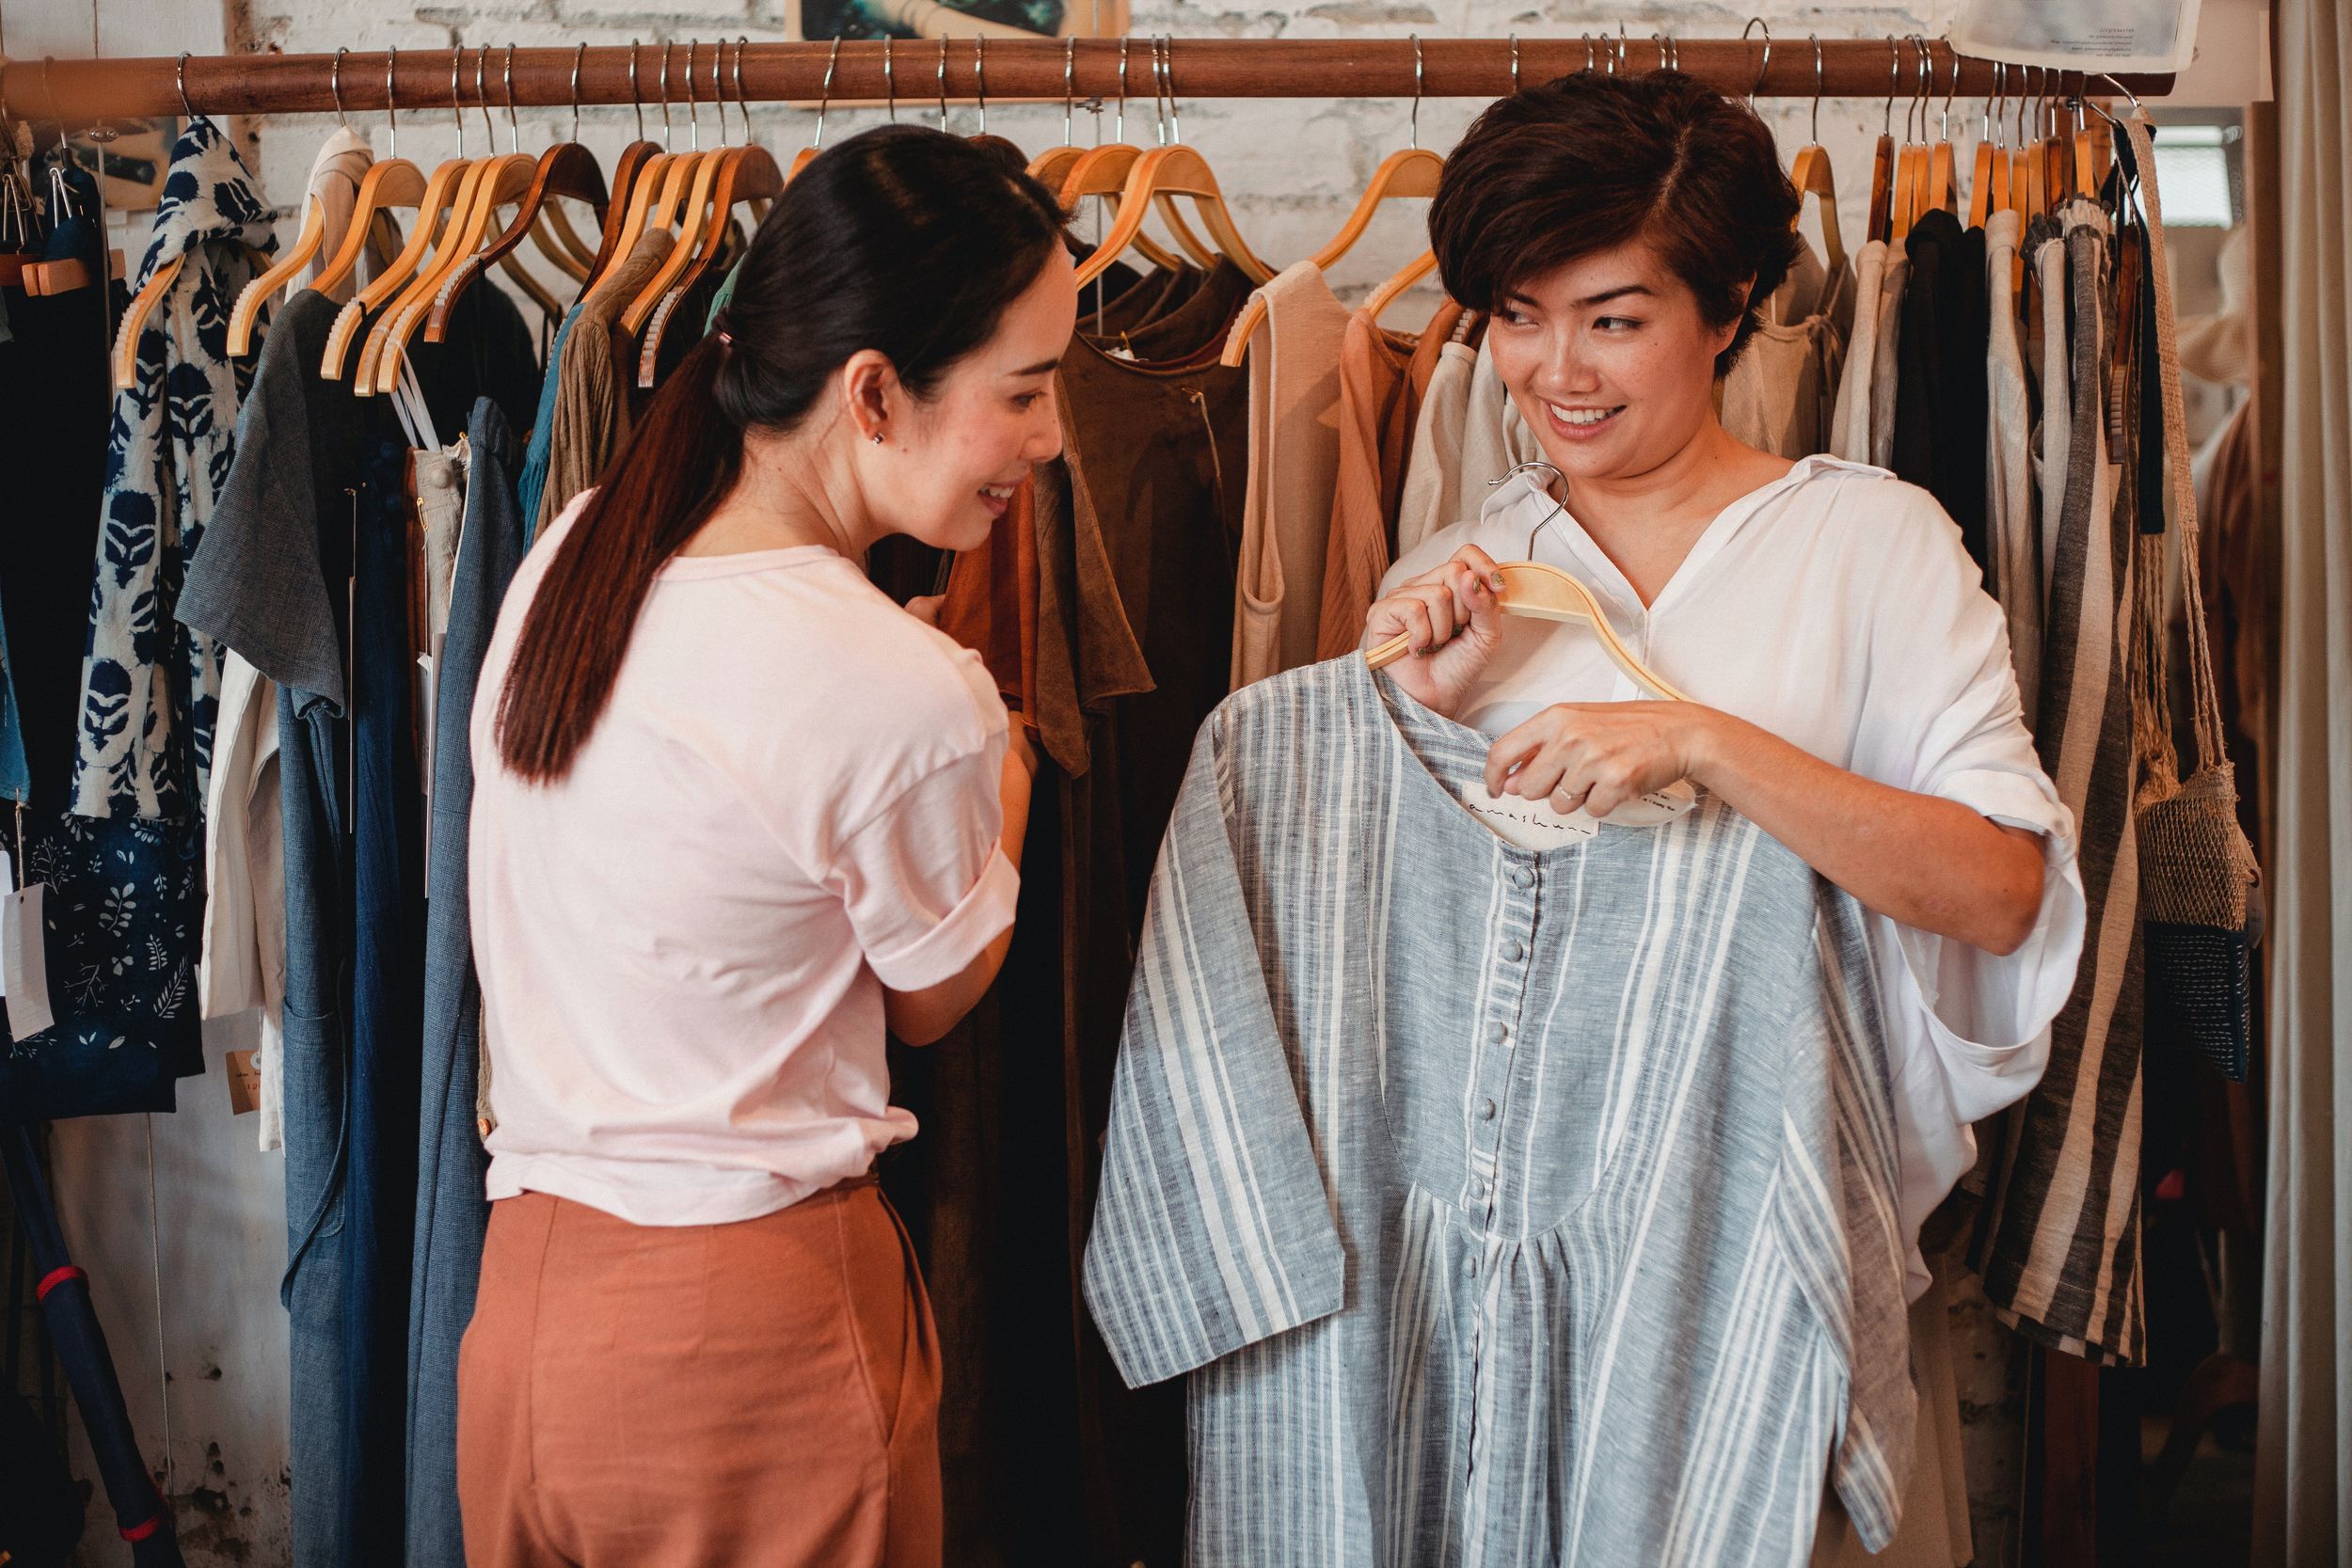 Two women look at the tag of a shirt in a clothing store.